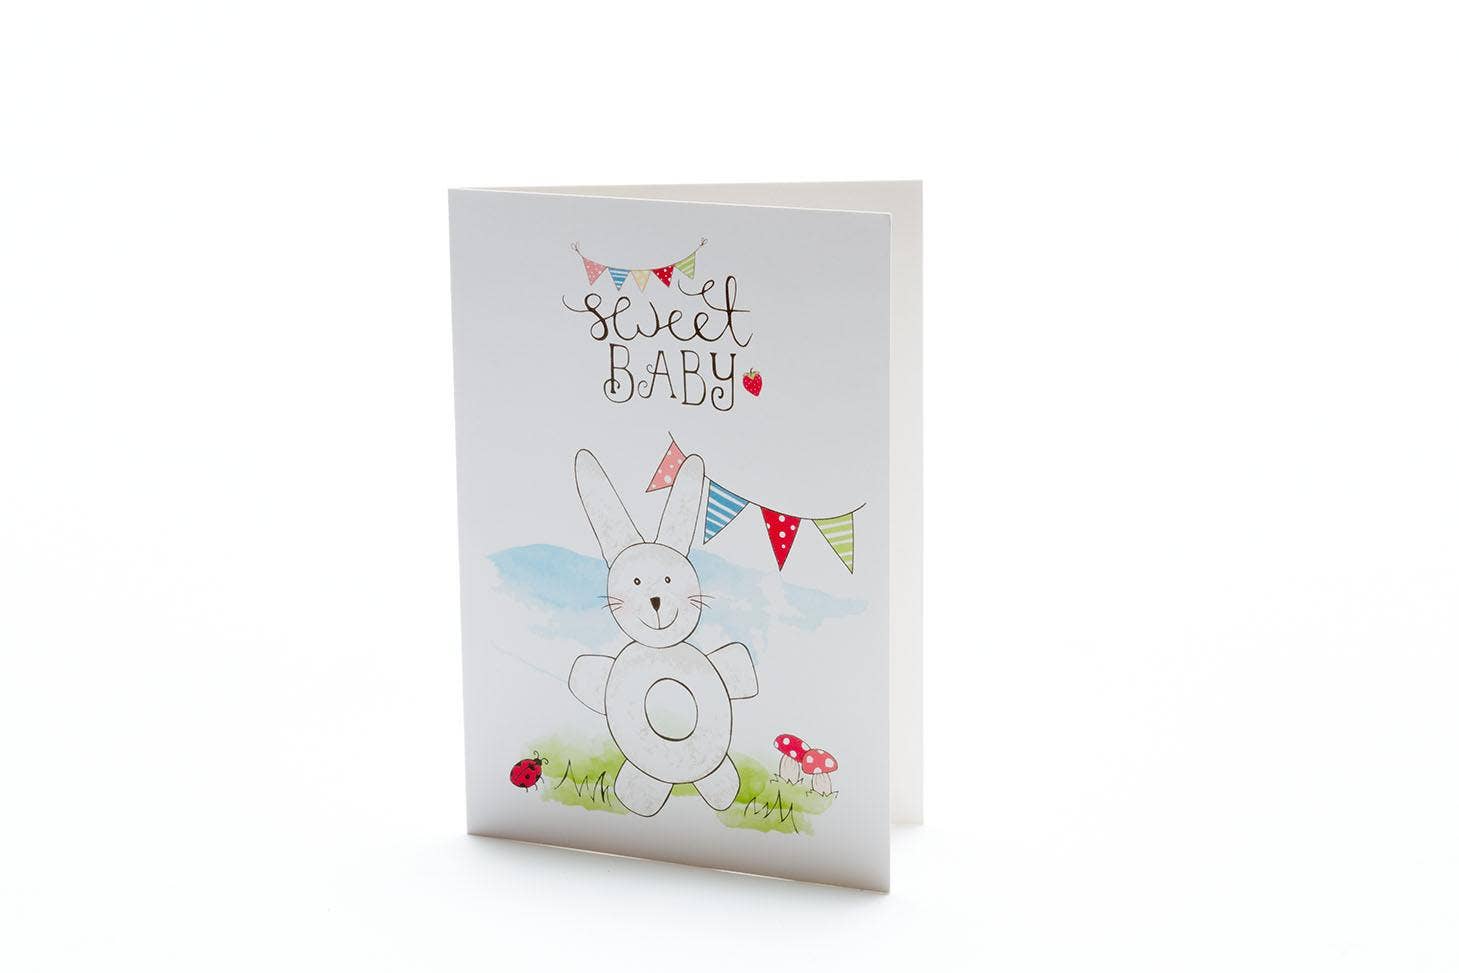 Welcome Baby Greetings Card with White Bunny